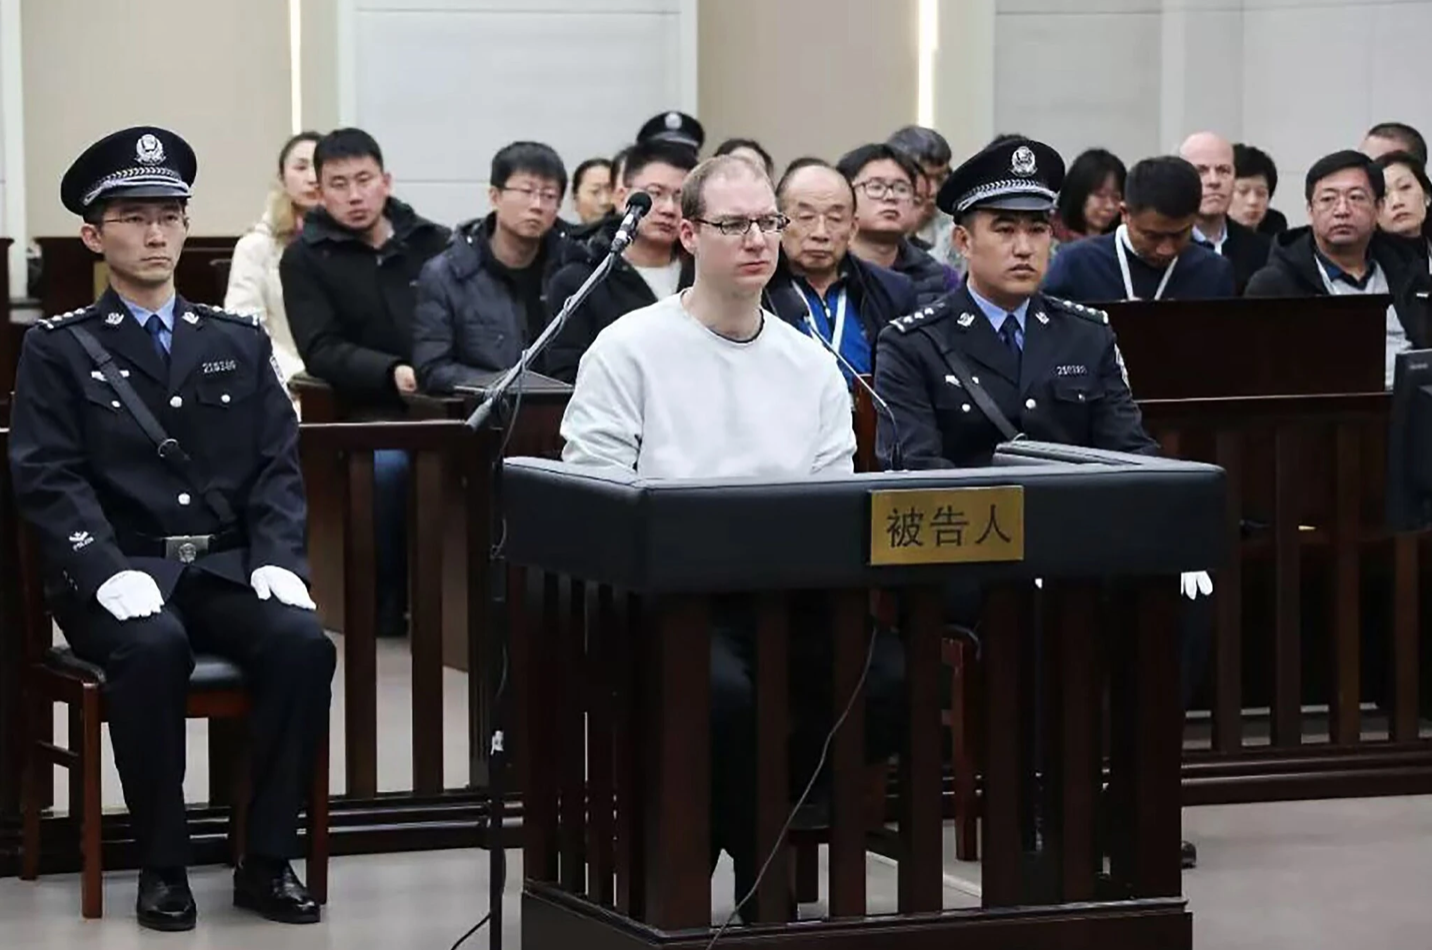 Chinese Court Rejects Canadian’s Appeal of Death Sentence for Drug Trafficking